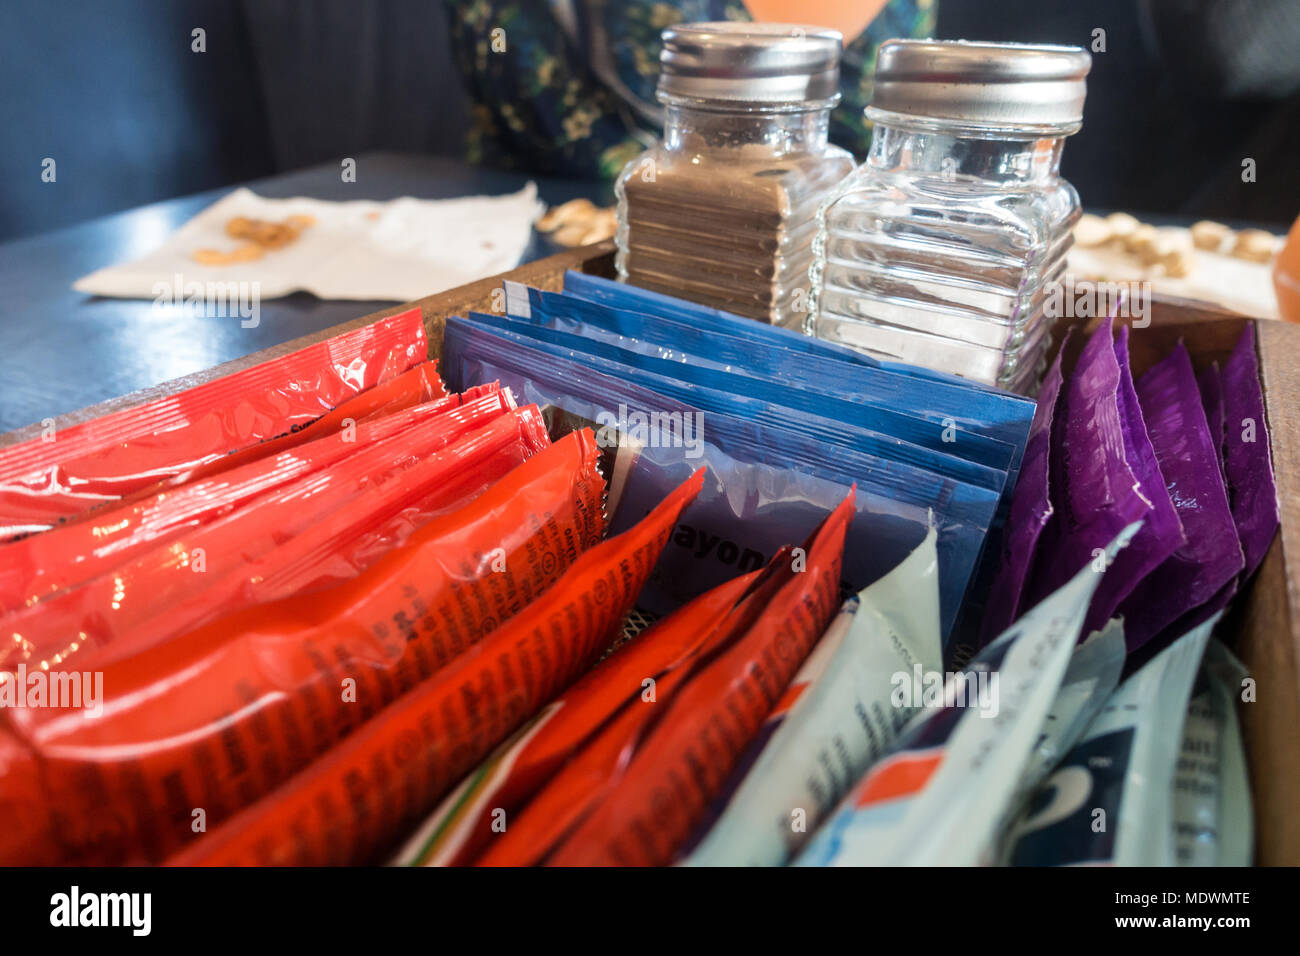 Salt, pepper and sachets of sauce in a tray on a table. Stock Photo